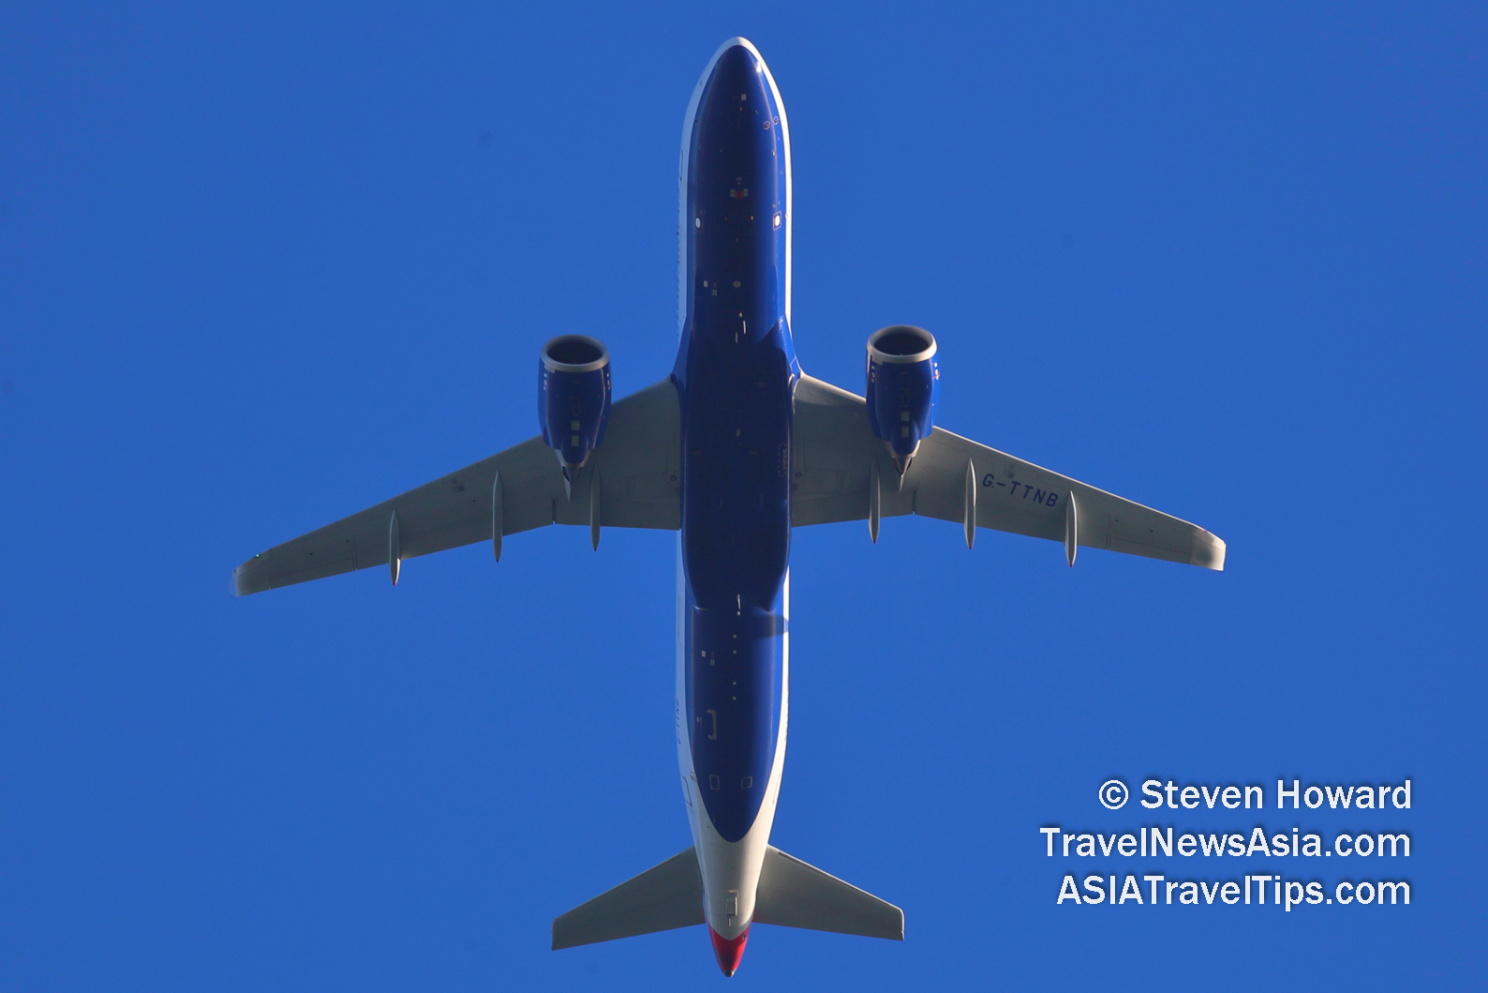 British Airways Airbus A320 reg: G-TTNB. Picture by Steven Howard of TravelNewsAsia.com Click to enlarge.